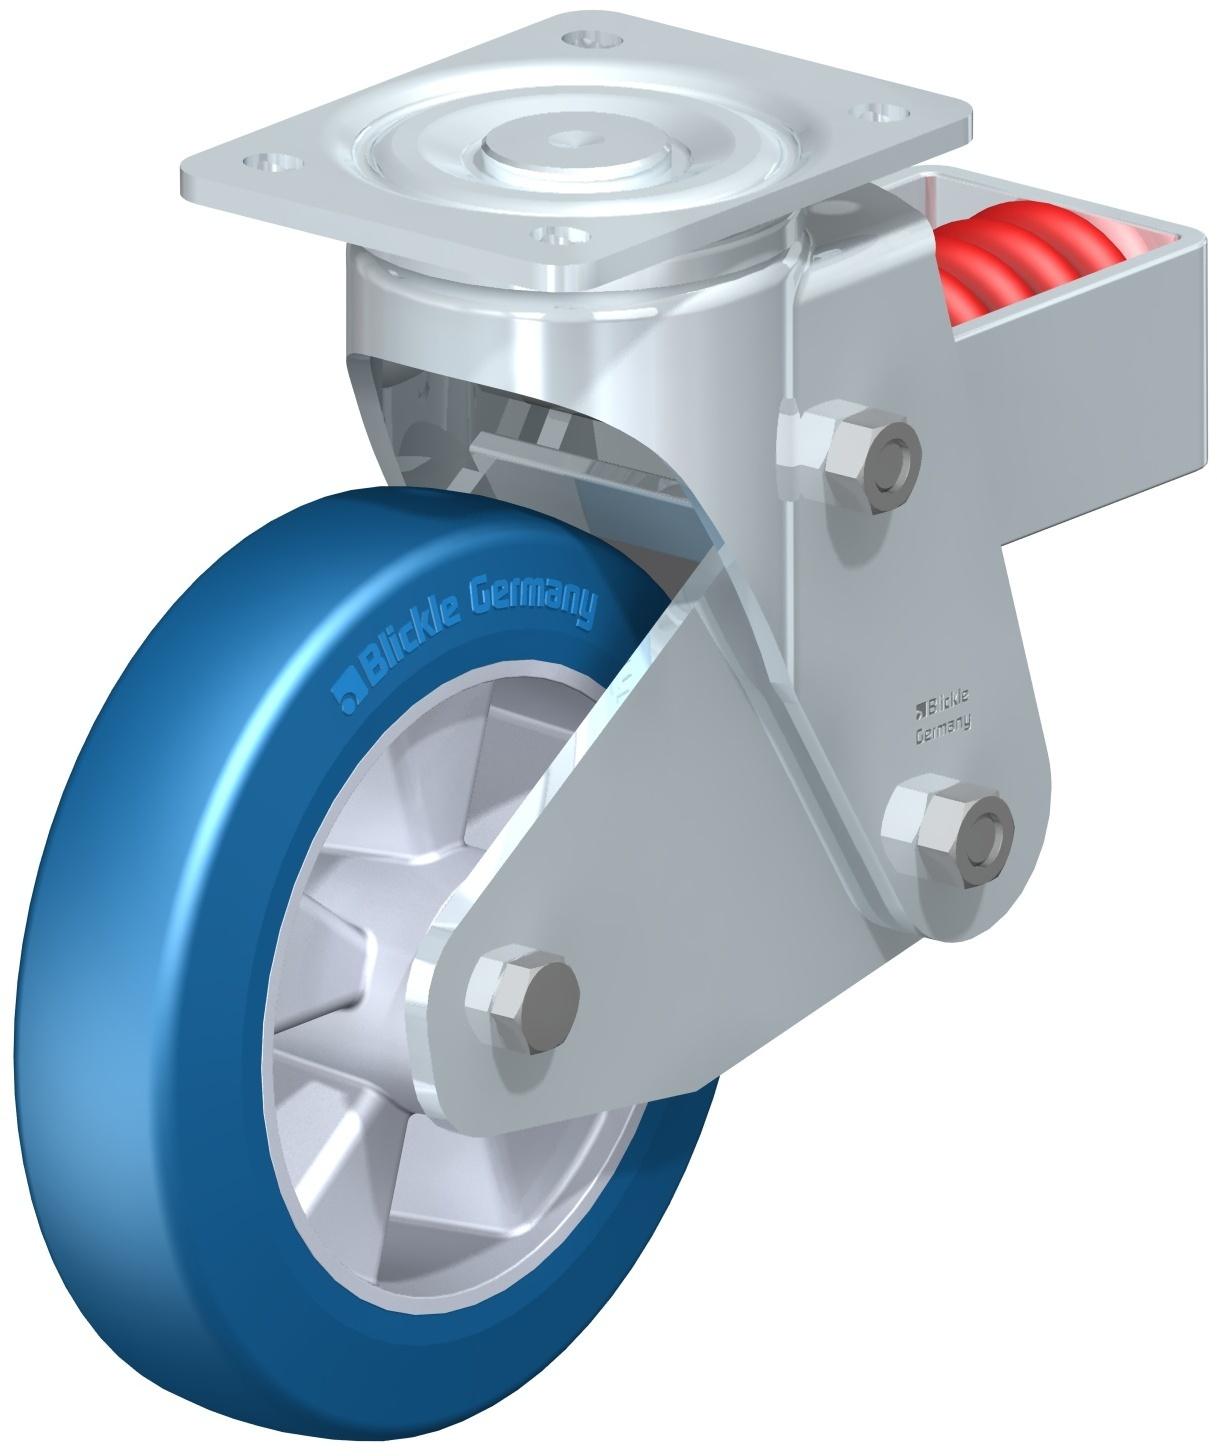 Spring tension	1256,6 lbs
Bolt hole Ø	0,43
Plate size	5.51 x 4.33
Bolt hole spacing	4.13 x 2.95-3.15
Wheel Ø	7,9 inch (D)
Wheel width	1,969 inch (T2)
Load capacity	1540 lbs
Initial tension	110,2 lbs
Spring travel	1 inch
Total height	10,4 inch (H)
Offset swivel caster	2,6 inch
unit weight	18,1 lbs
Temperature resistance to	-13 °F
Temperature resistance to	158 °F
tread and tire hardness	75° Shore A
Bearing type:	Ball bearing